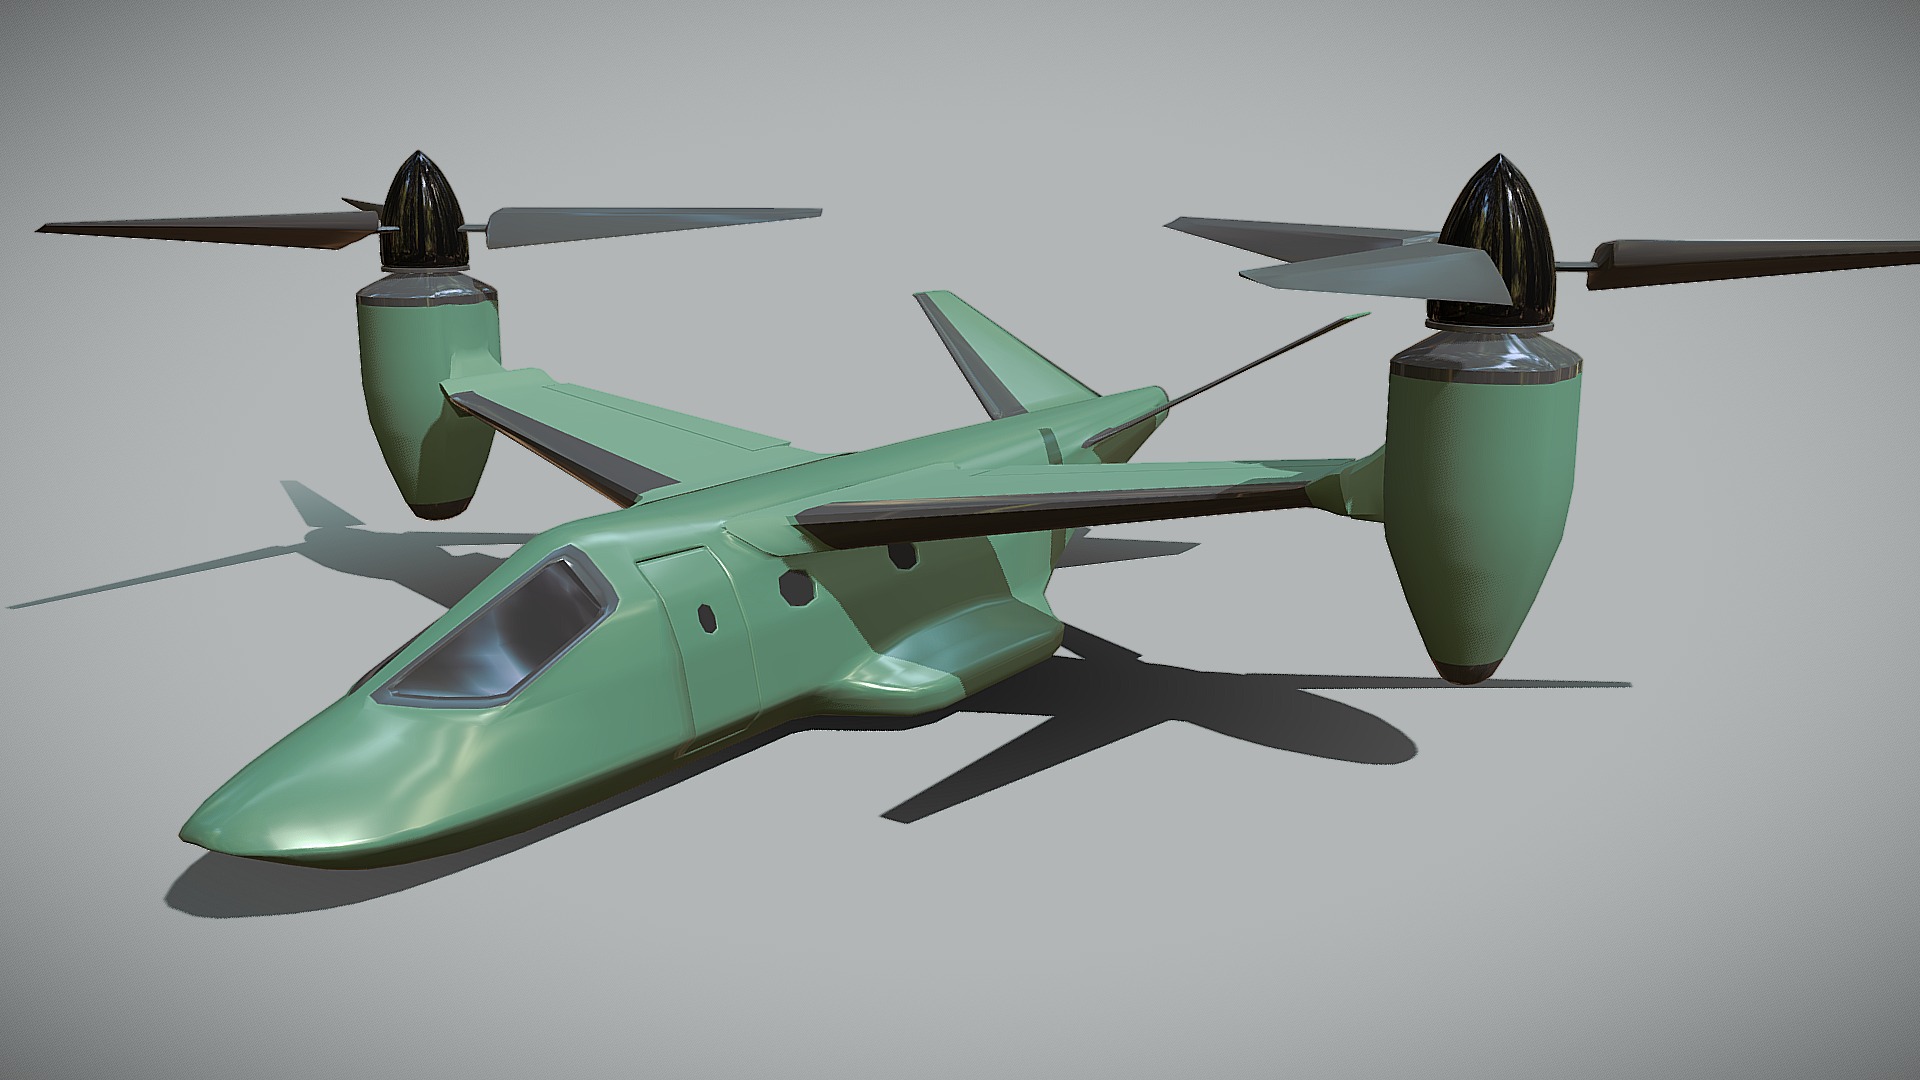 3D model Military VTOL aircraft concept - This is a 3D model of the Military VTOL aircraft concept. The 3D model is about a green and white toy helicopter.